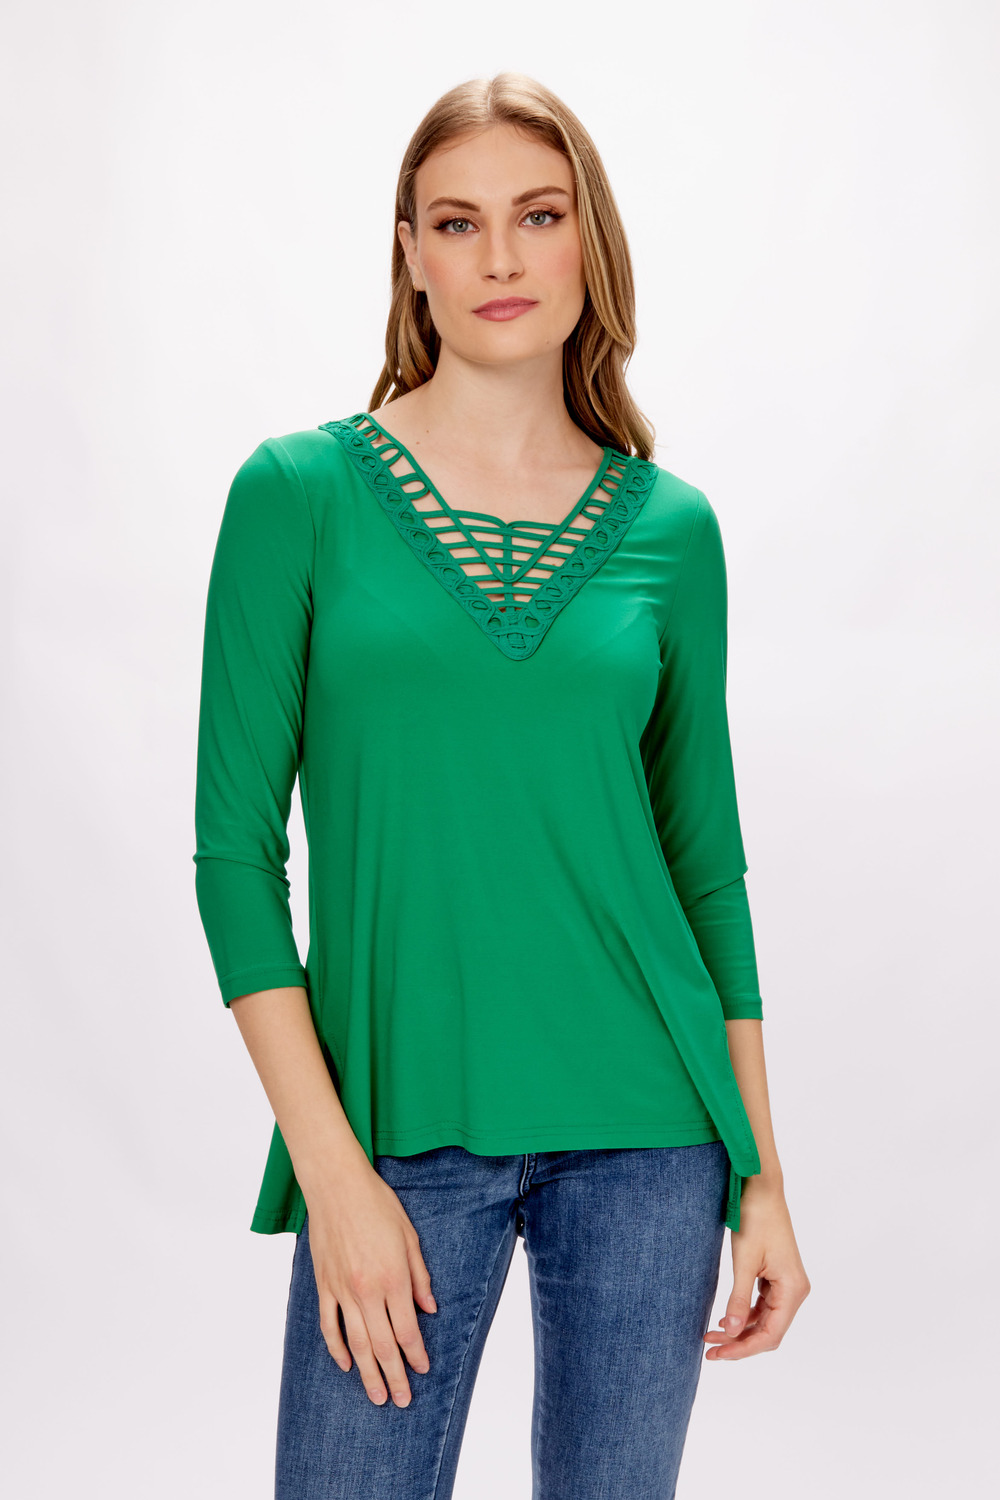 Lace-Up Detail Neckline Top Style 233124. Kelly Green